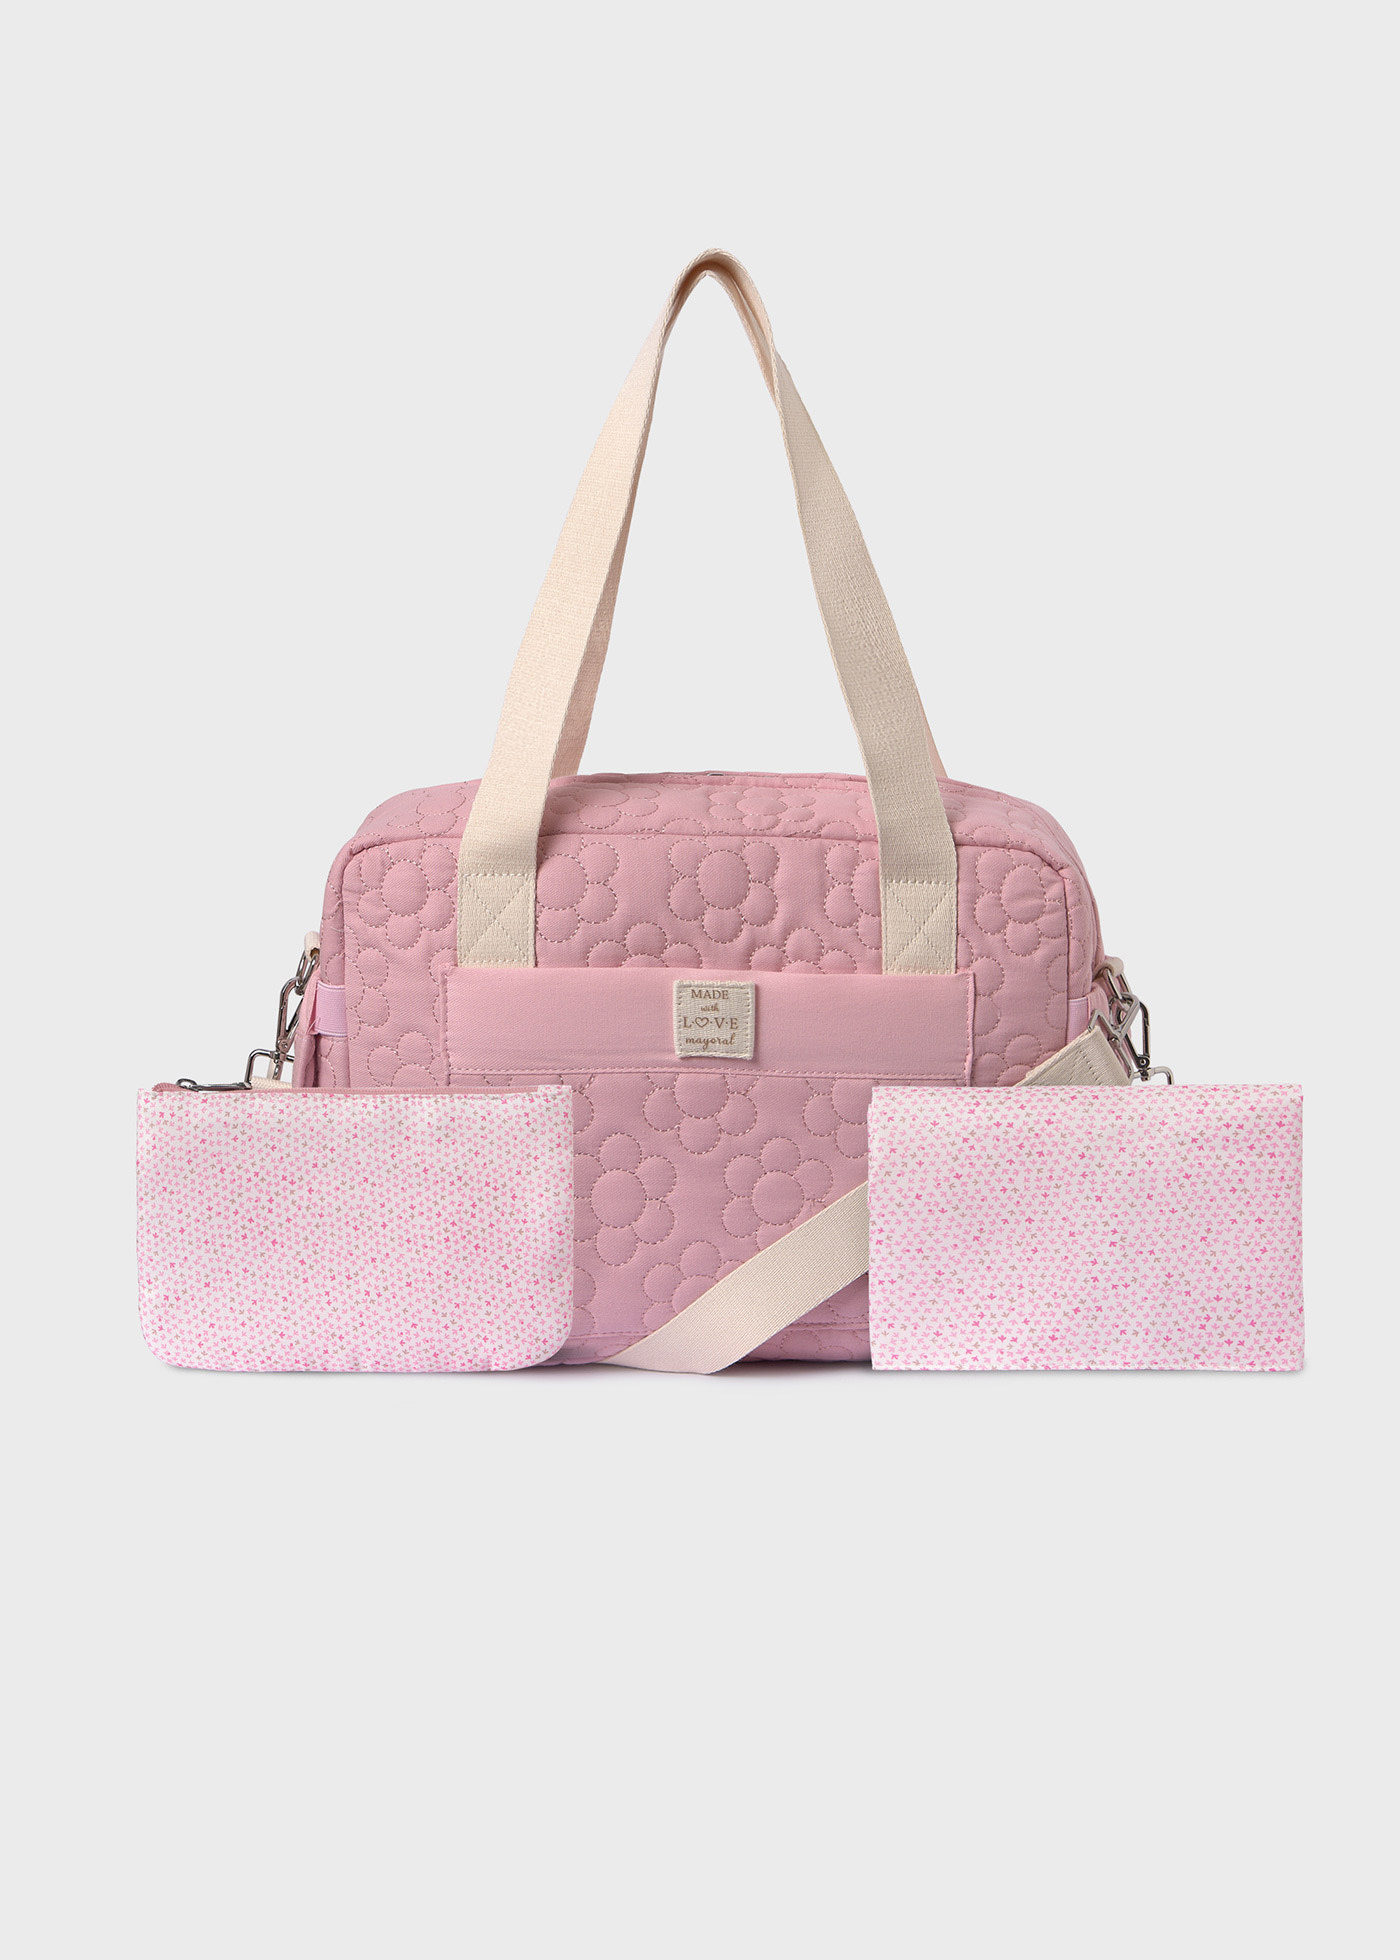 Diaper bag with accessories